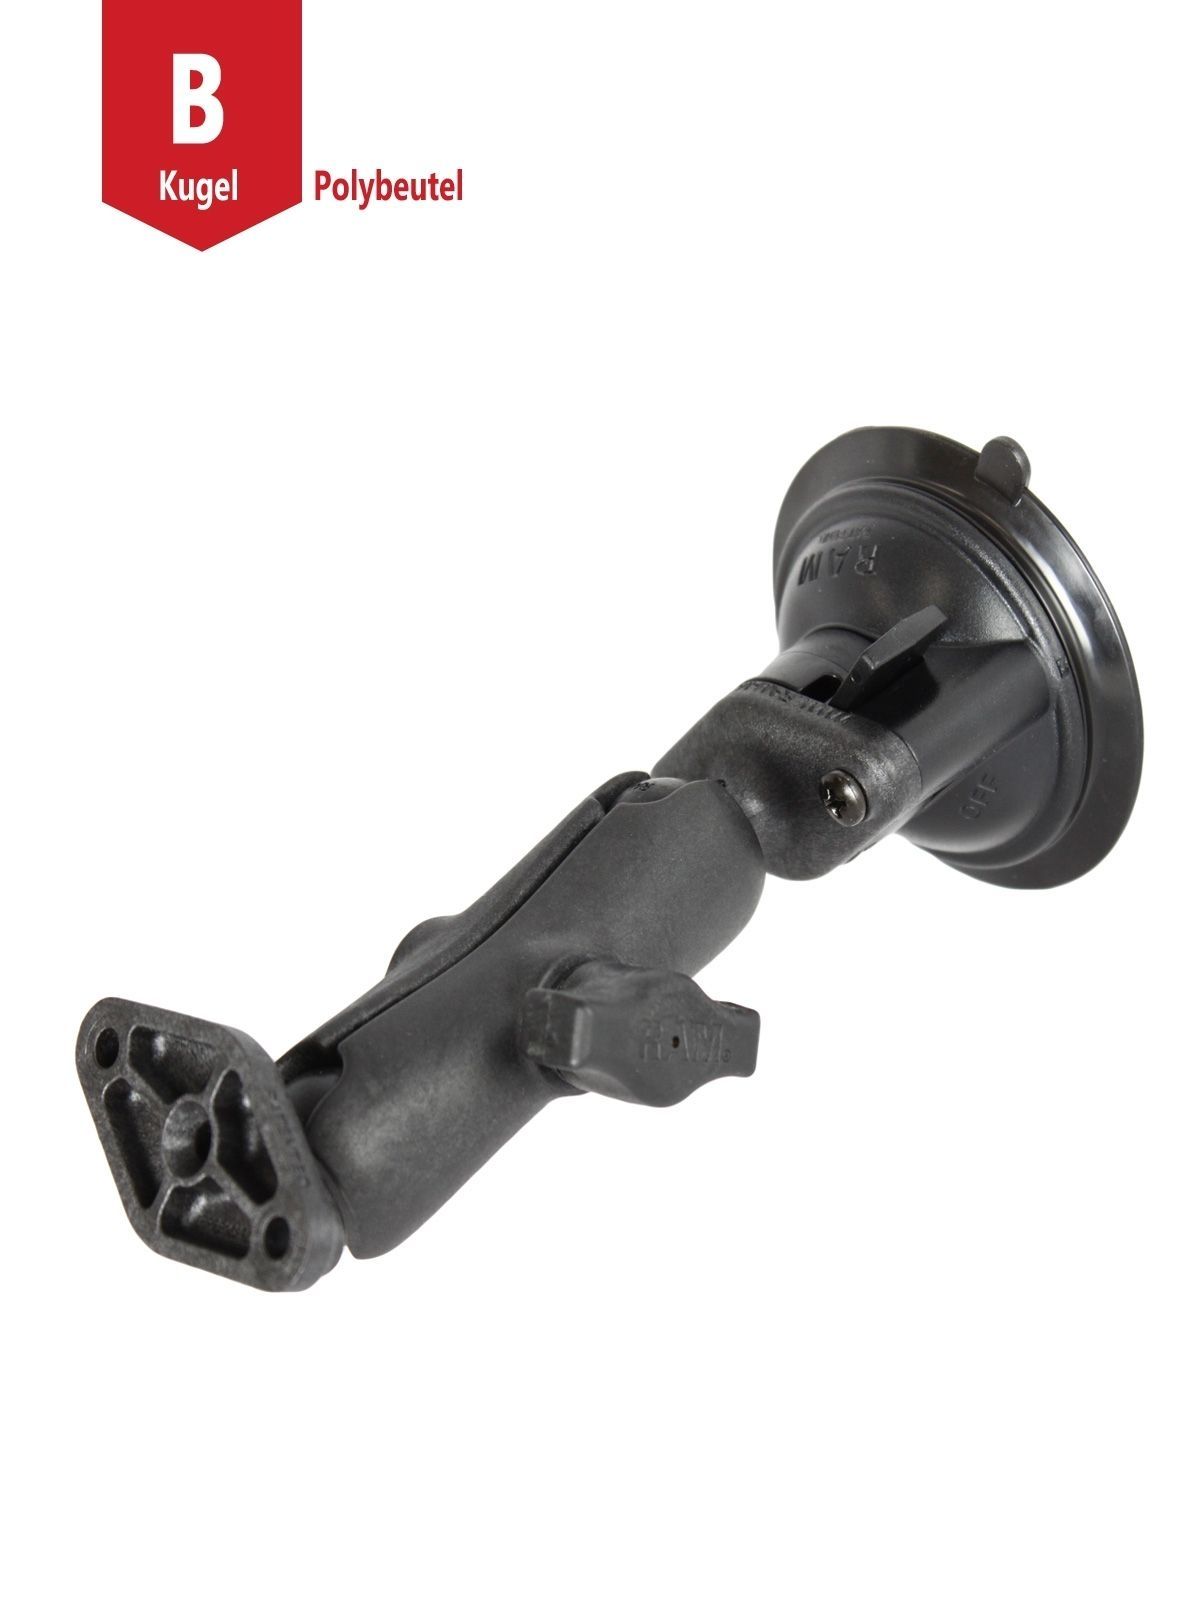 RAM MOUNTS High Strength Composite Suction Mount with Diamond Connection